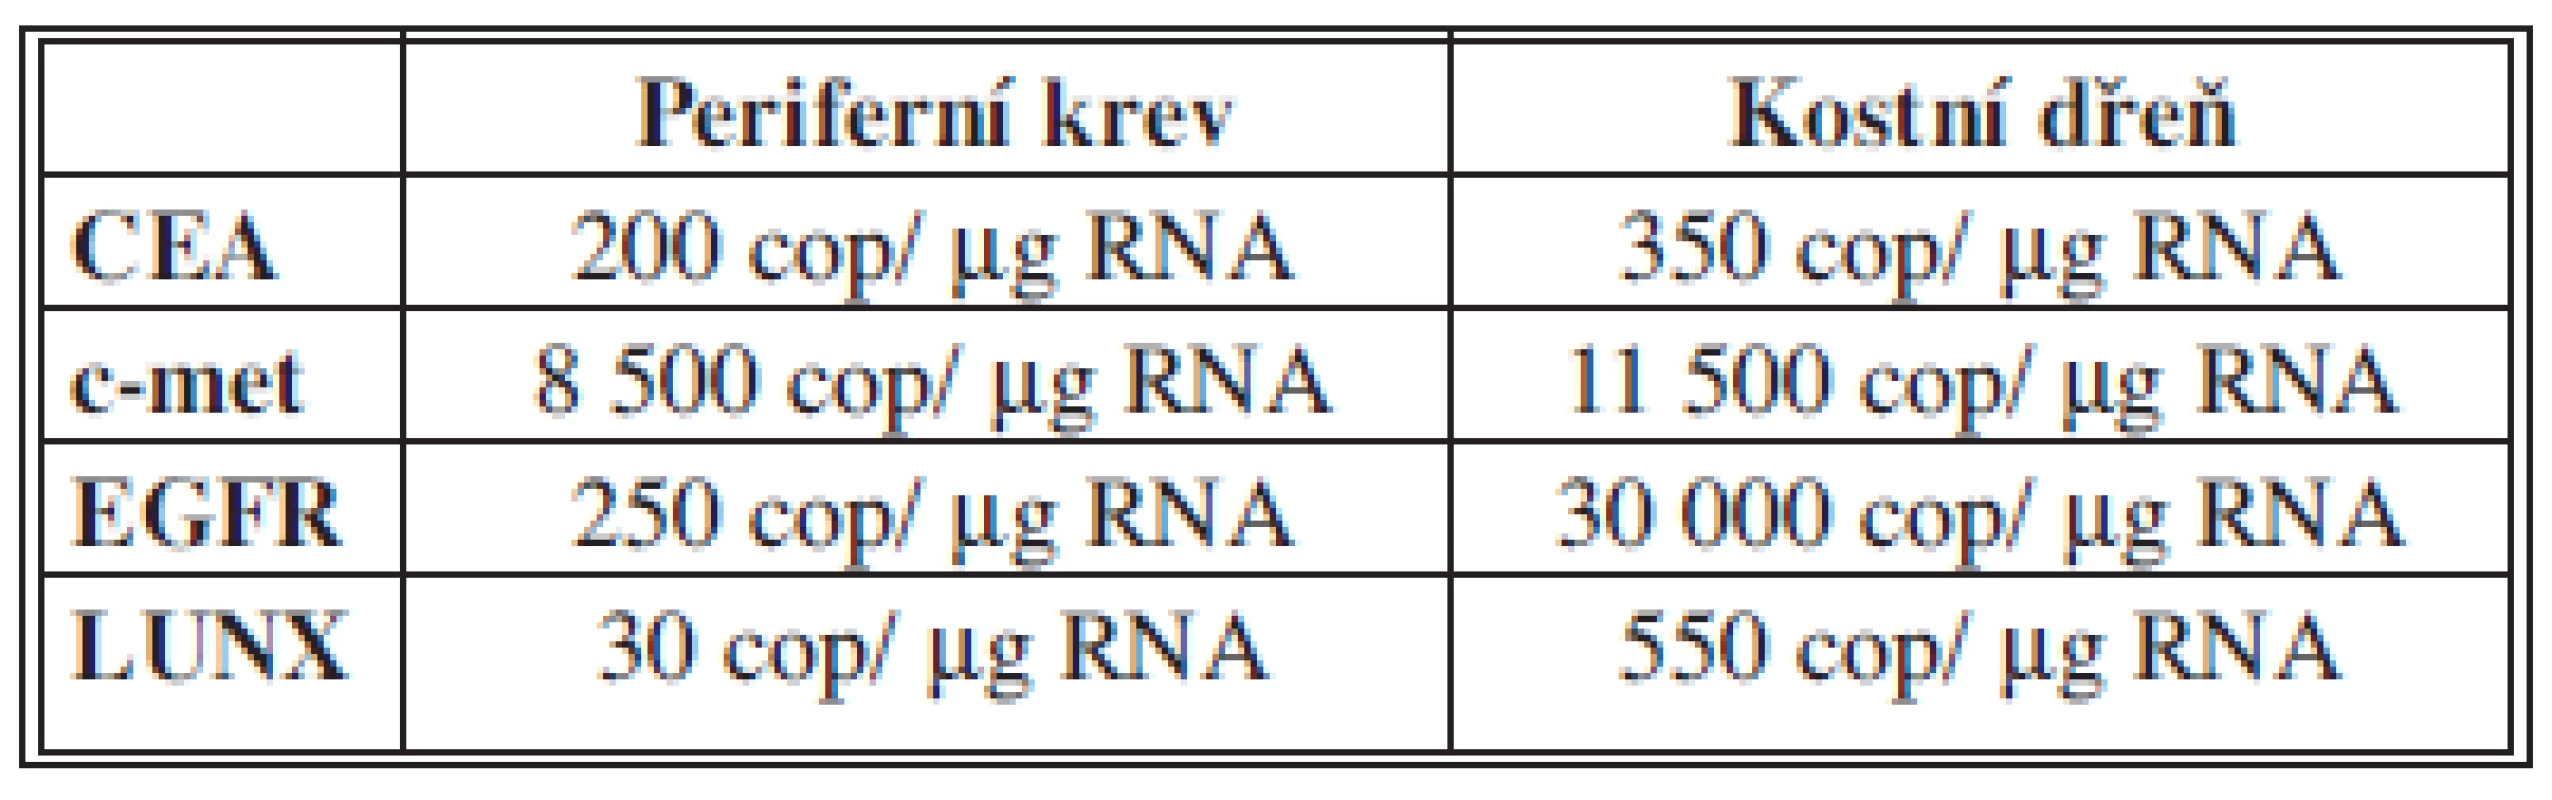 Stanovené cut-off hodnoty vybraných markerů
Tab. 1: The cut-off values of individual biomarkers